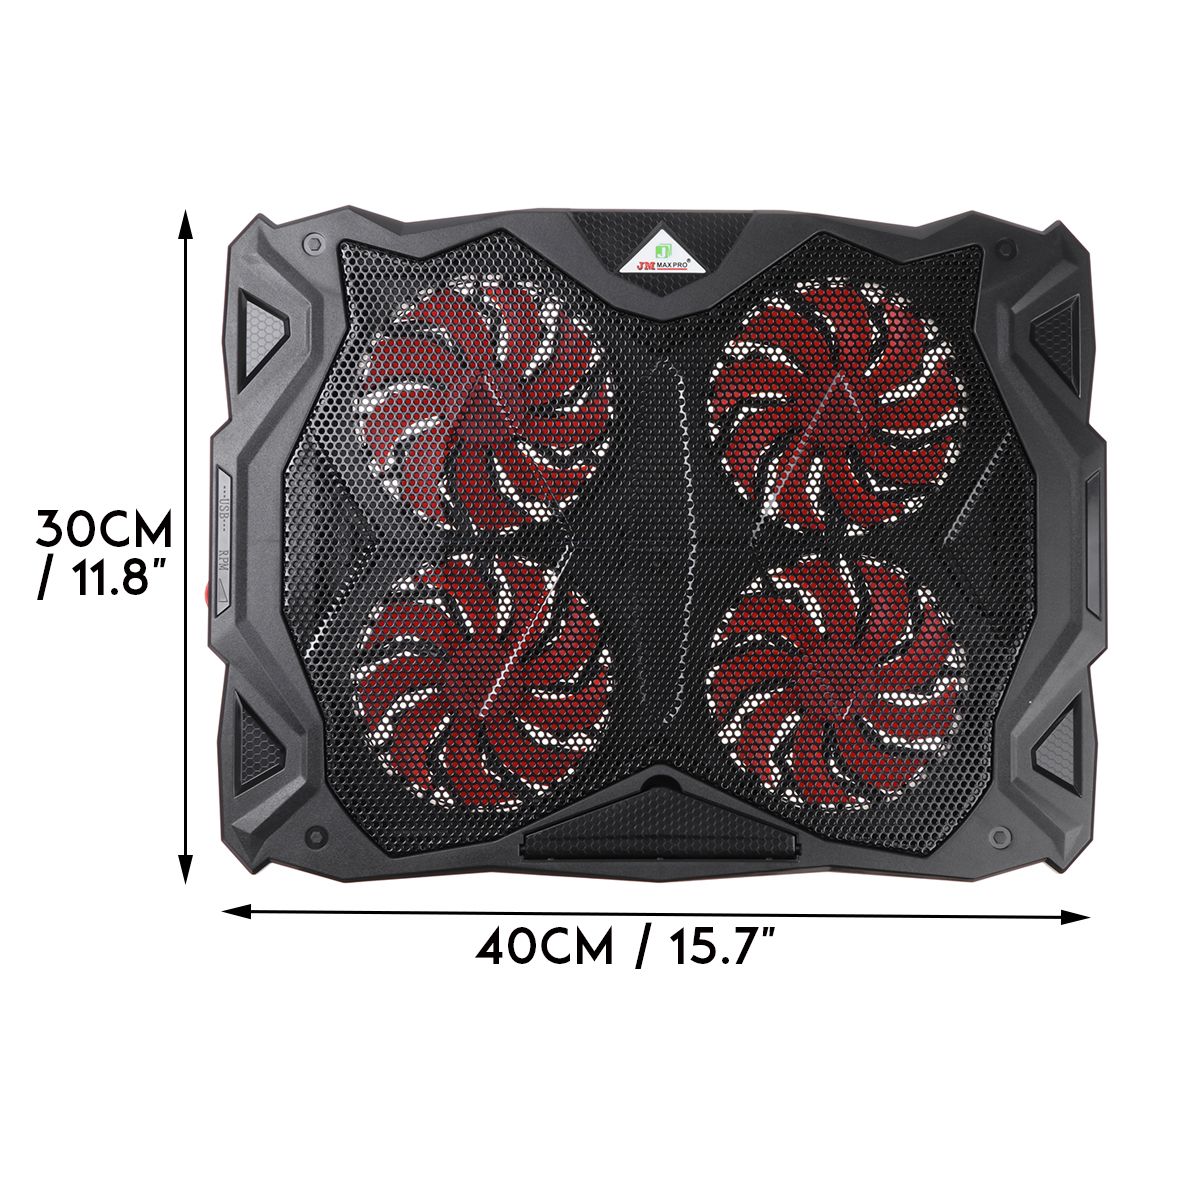 Foldable-Laptop-Cooling-Pad-Radiator-Laptop-Stand-1100Rpm-4-Fans-USB-Lifting-Cooling-Bracket-for-17q-1751590